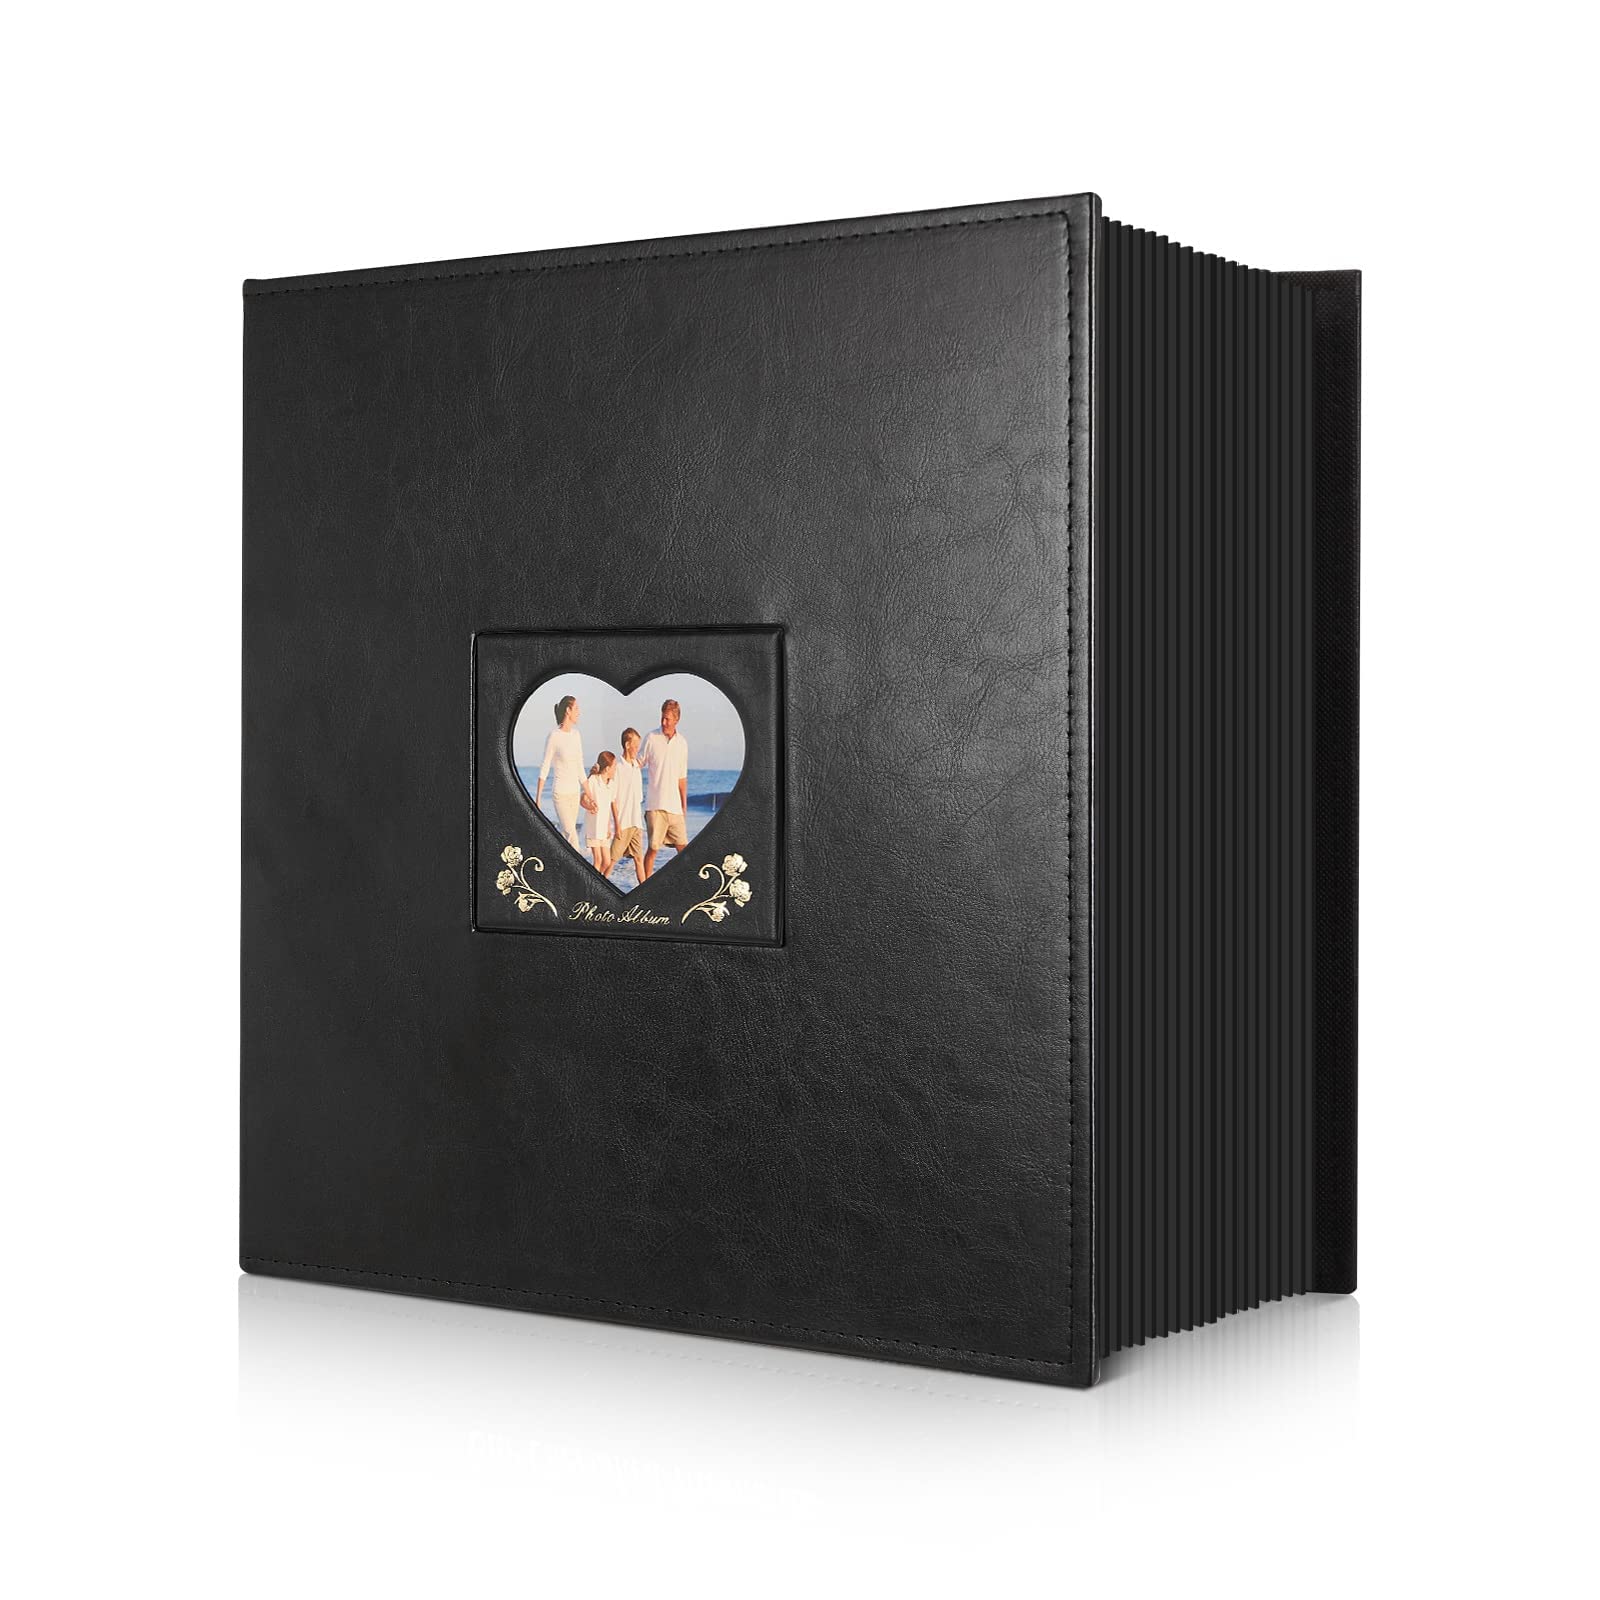 Photo Album 4x6 500 Pockets Photos, Extra Large Capacity Family Wedding  Picture Albums Holds 500 Horizontal and Vertical Photos (500Pockets, Black)  500Pockets Black